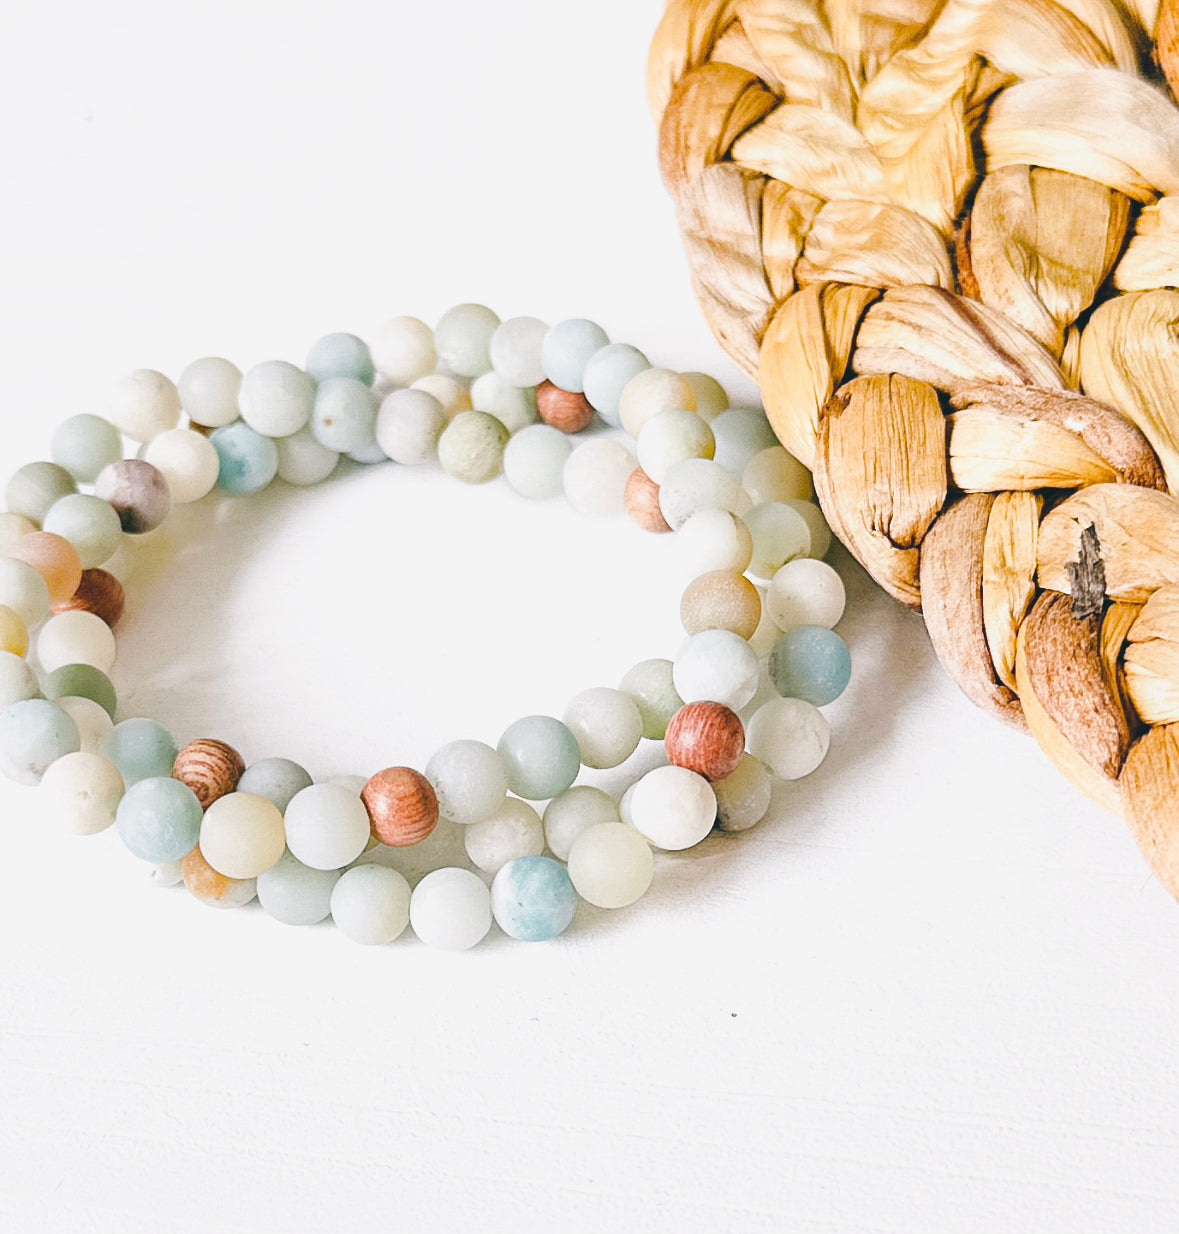 Natural Authentic gemstone jewelry bracelets created with matte Amazonite and rosewood gemstone beads